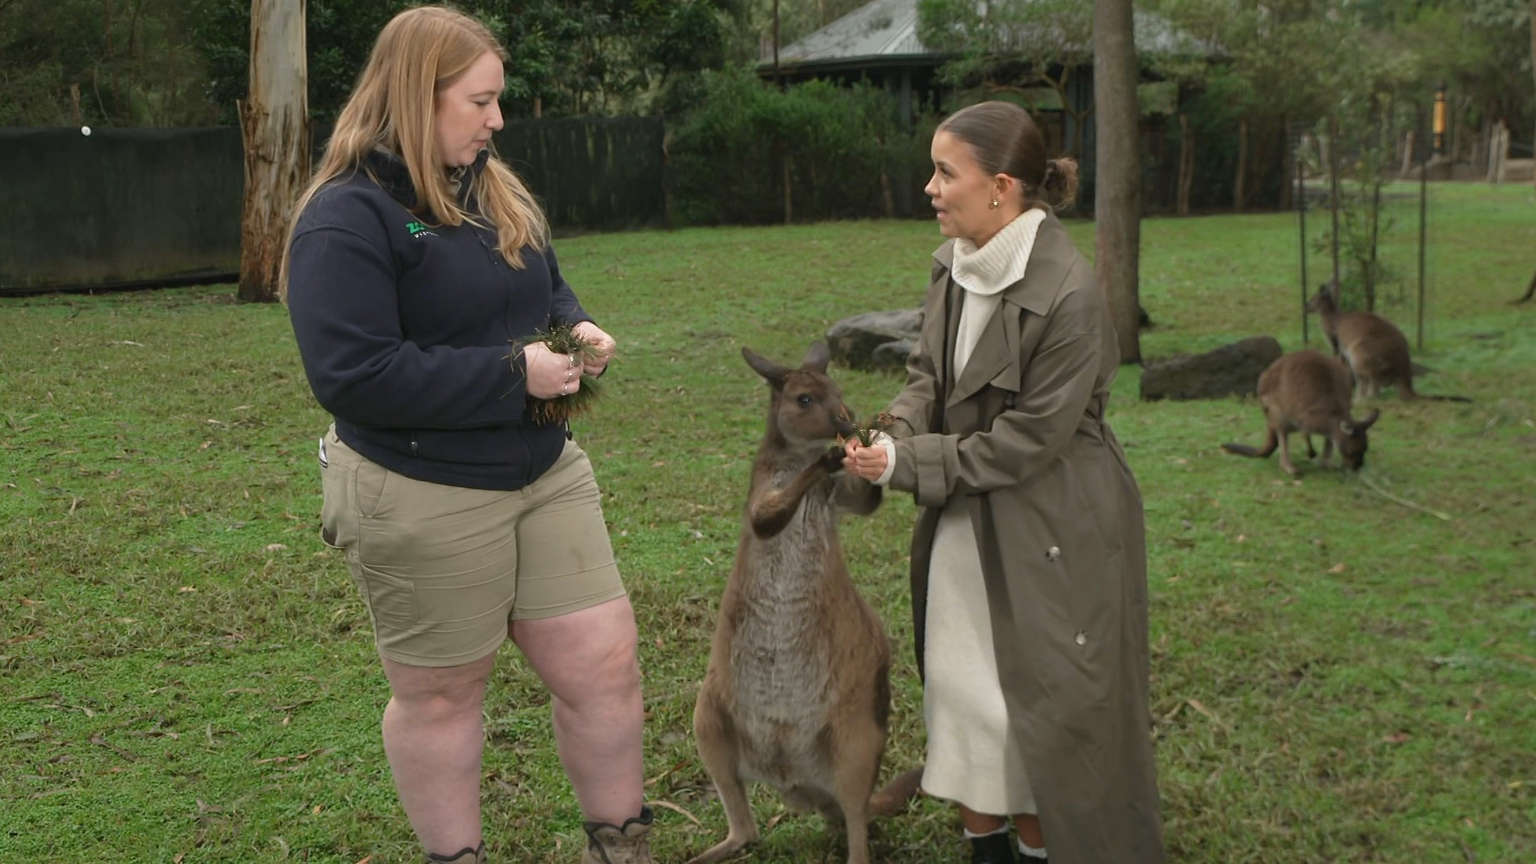 Healesville a dream for animal-lovers